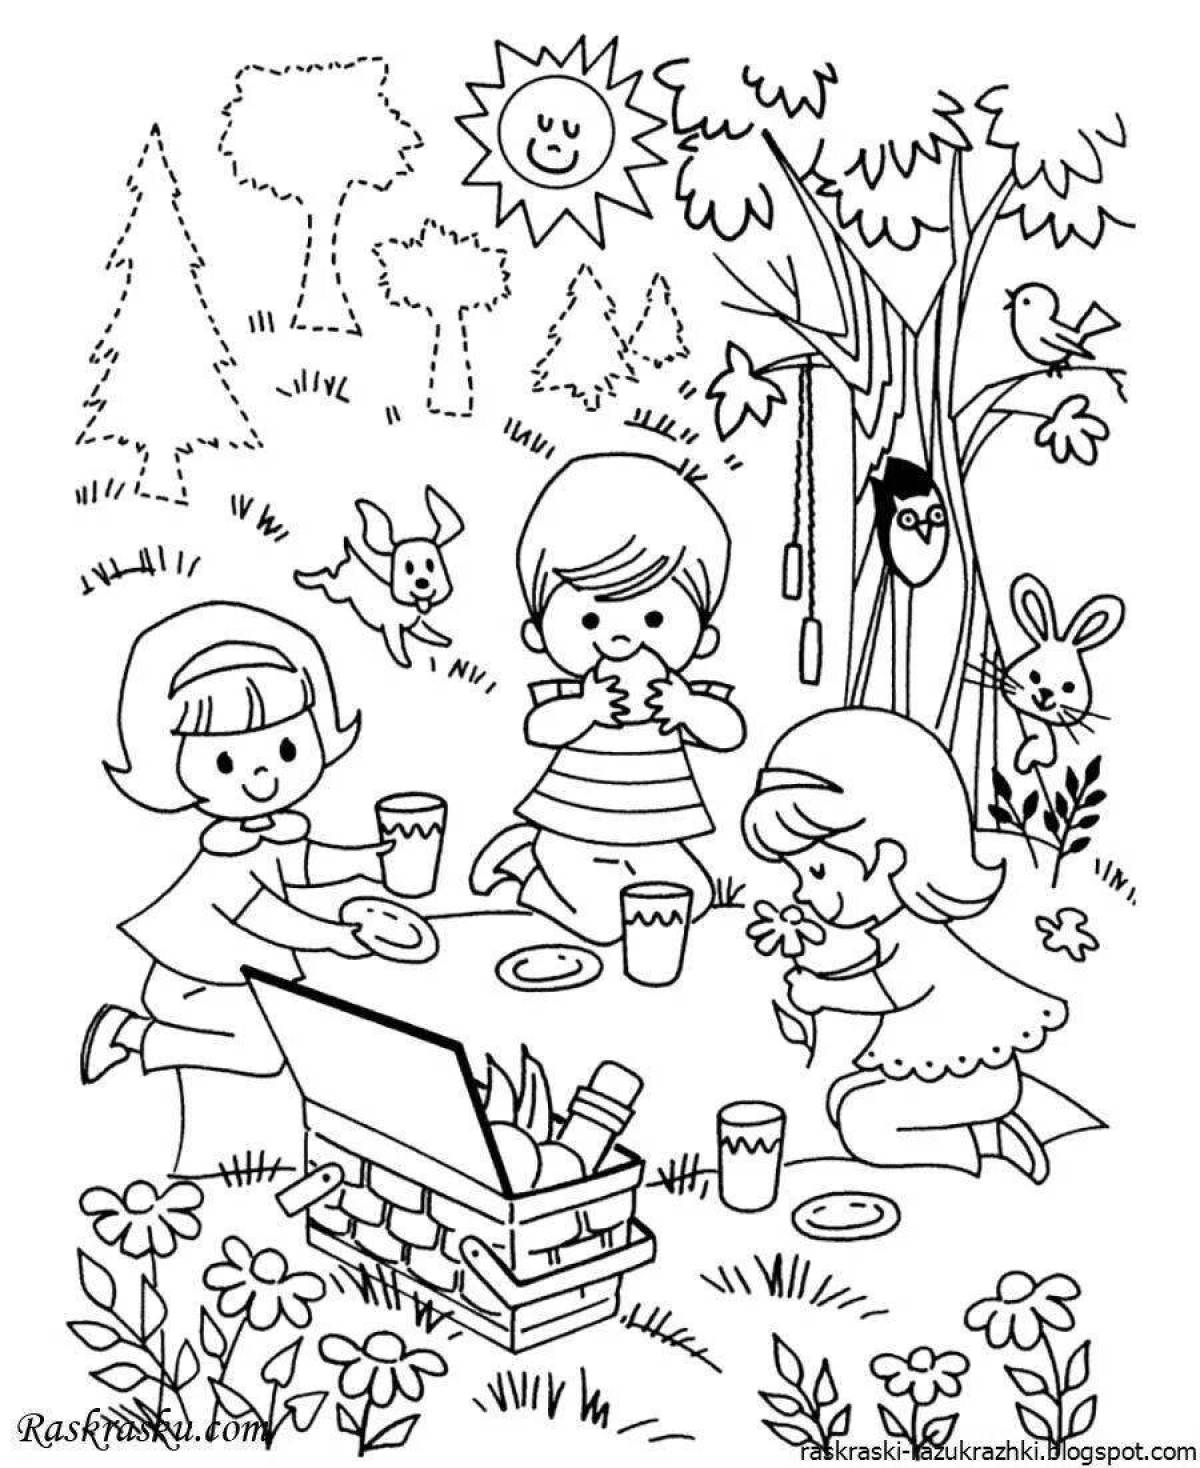 Exquisite childhood coloring book